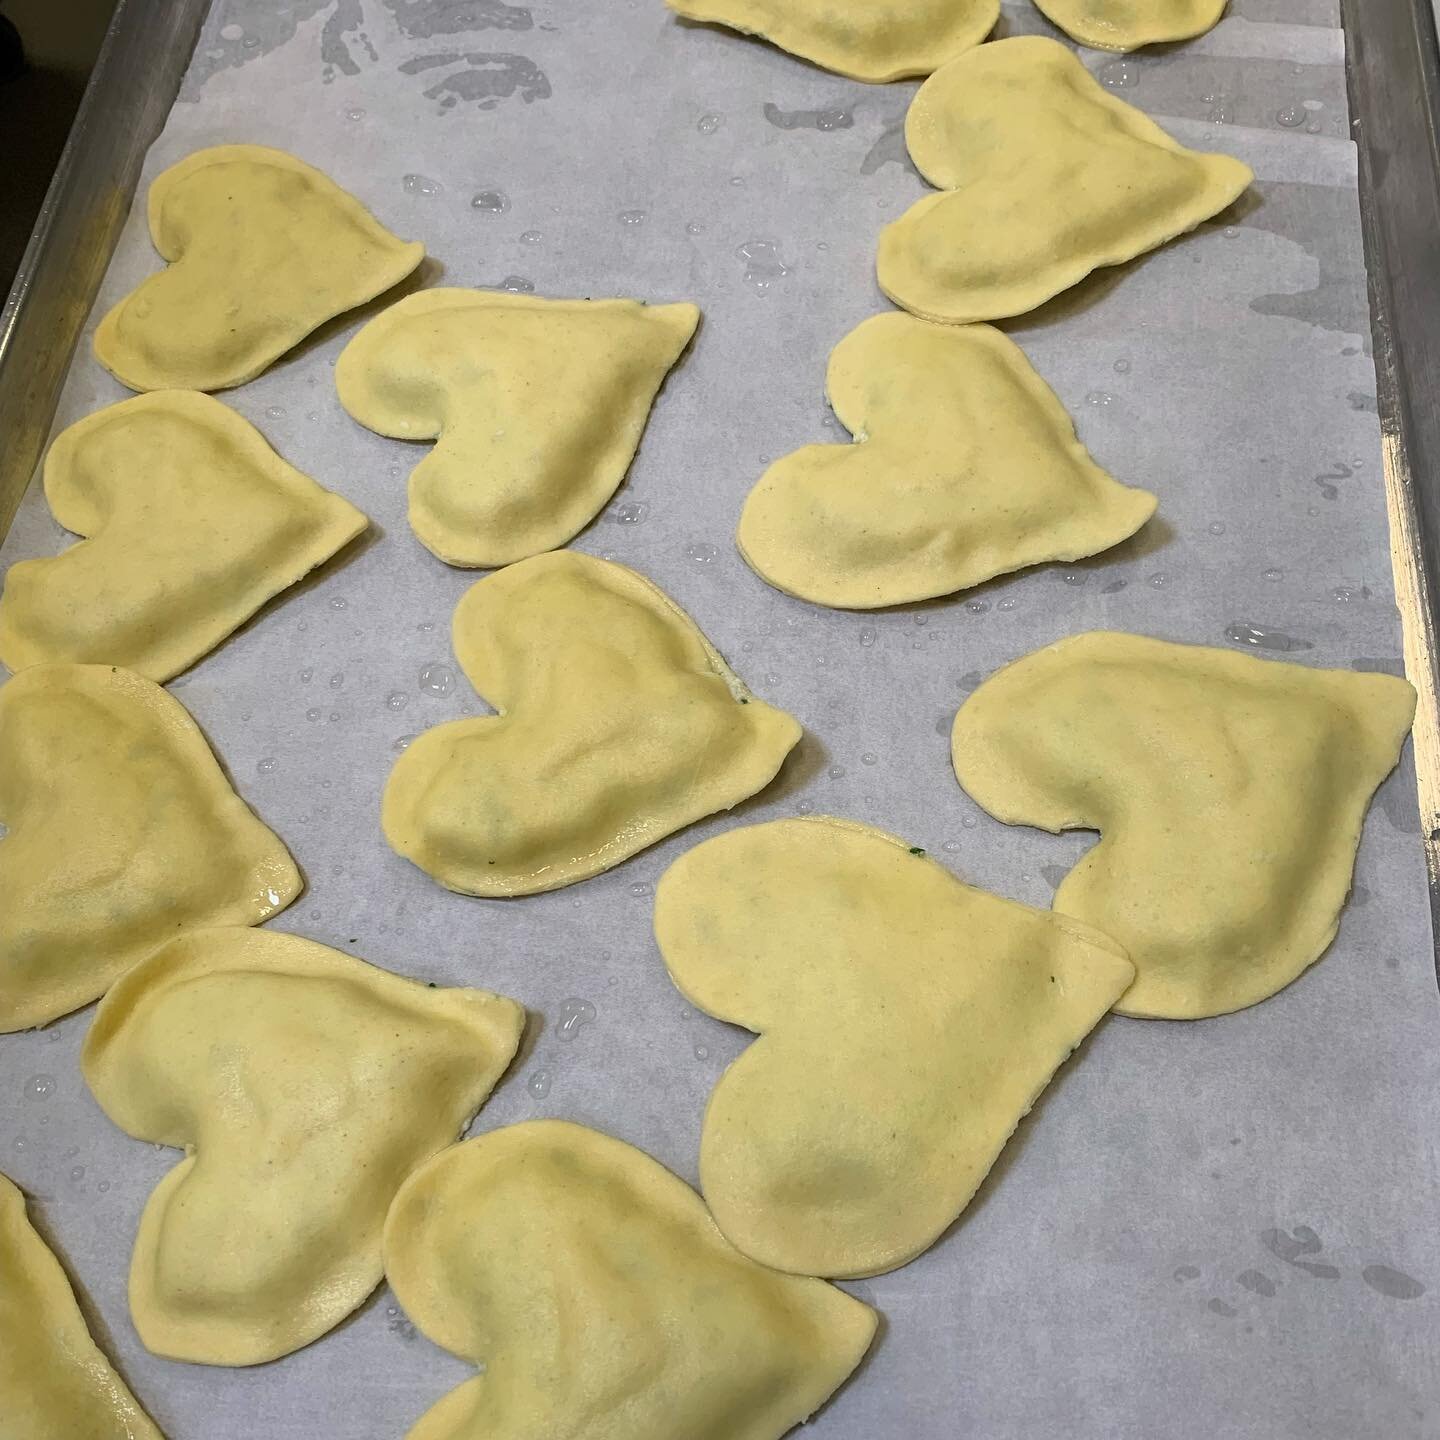 It&rsquo;s a love story, baby just say yes&hellip; to pasta on Valentines Dayyy 💛

We had fun with this special order of heart shaped cheese ravioli for @merlinofoodsseattle 😍